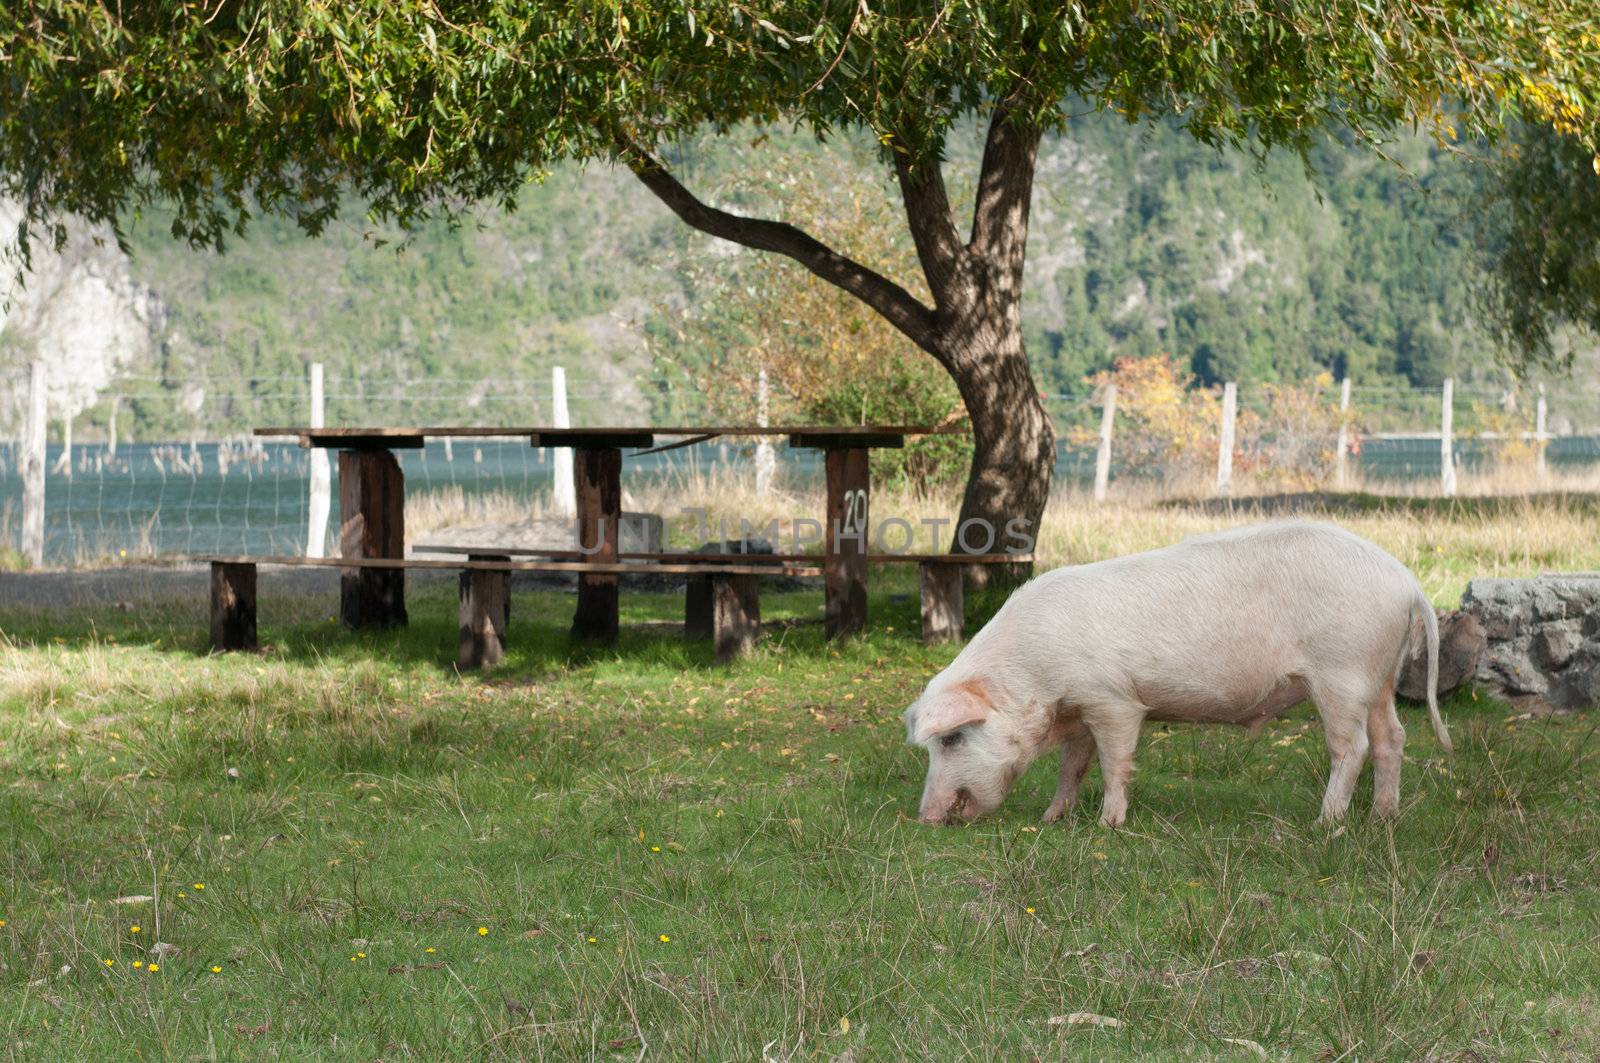 Picnic table and Pig by bigmagic